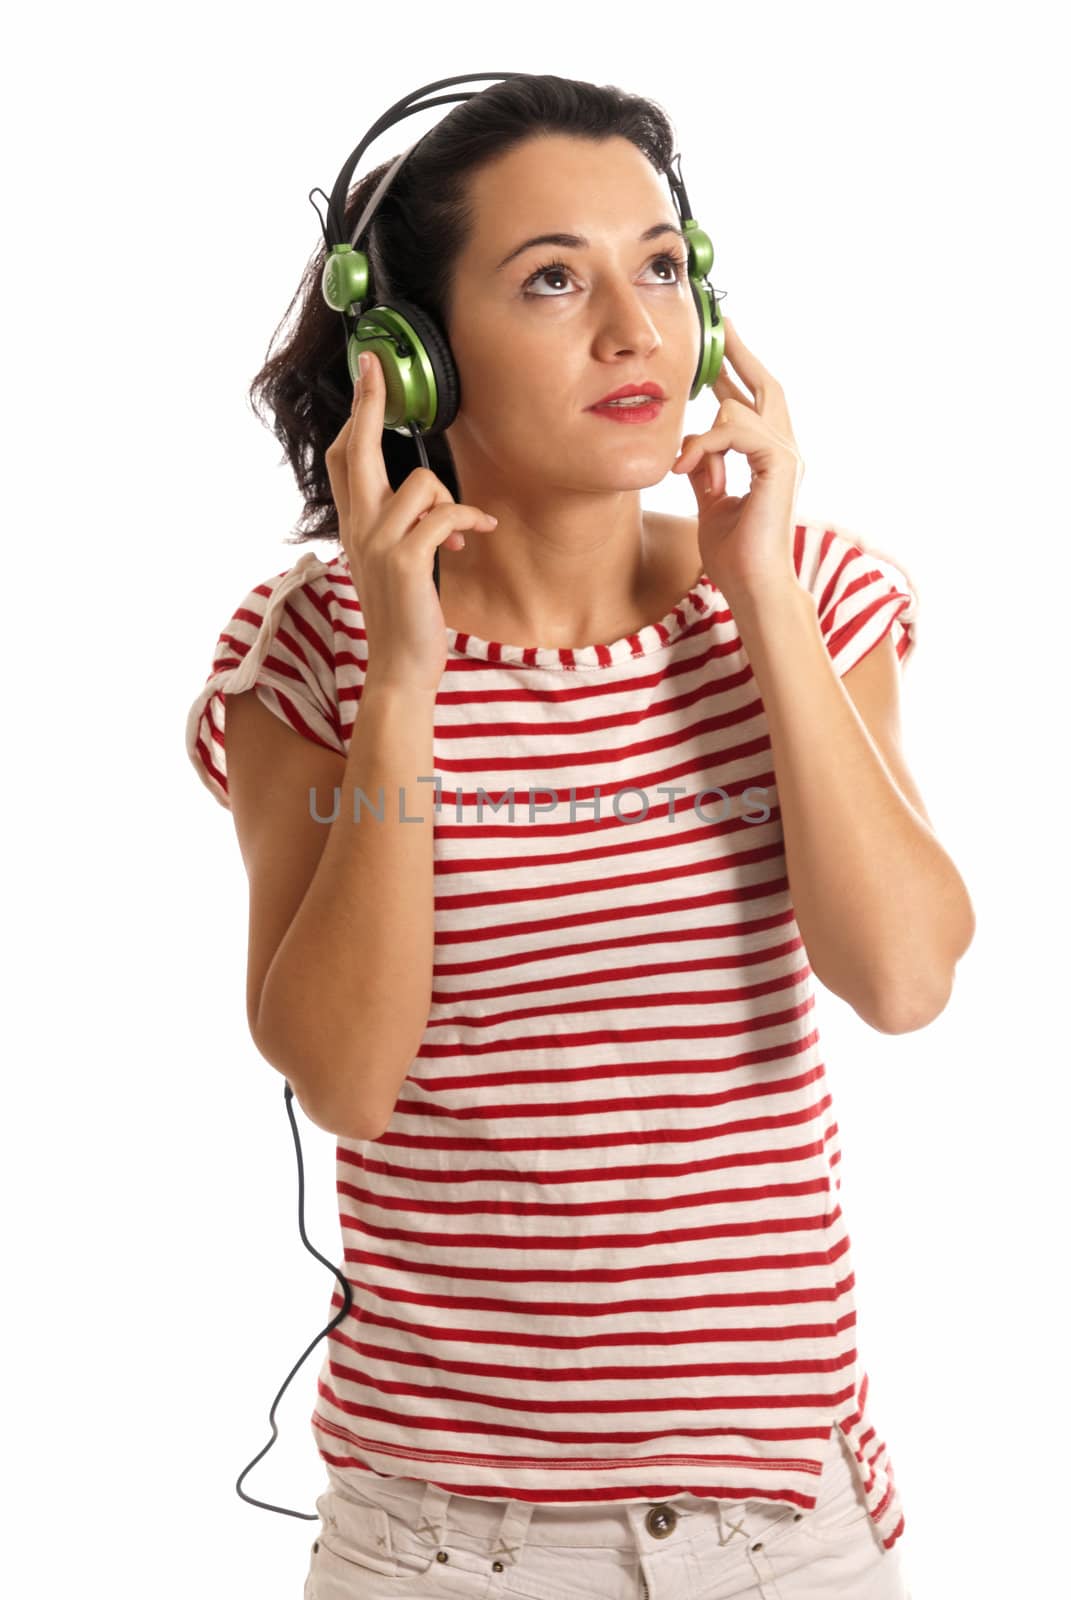 Young woman listening music with headphones standing on white background by dgmata